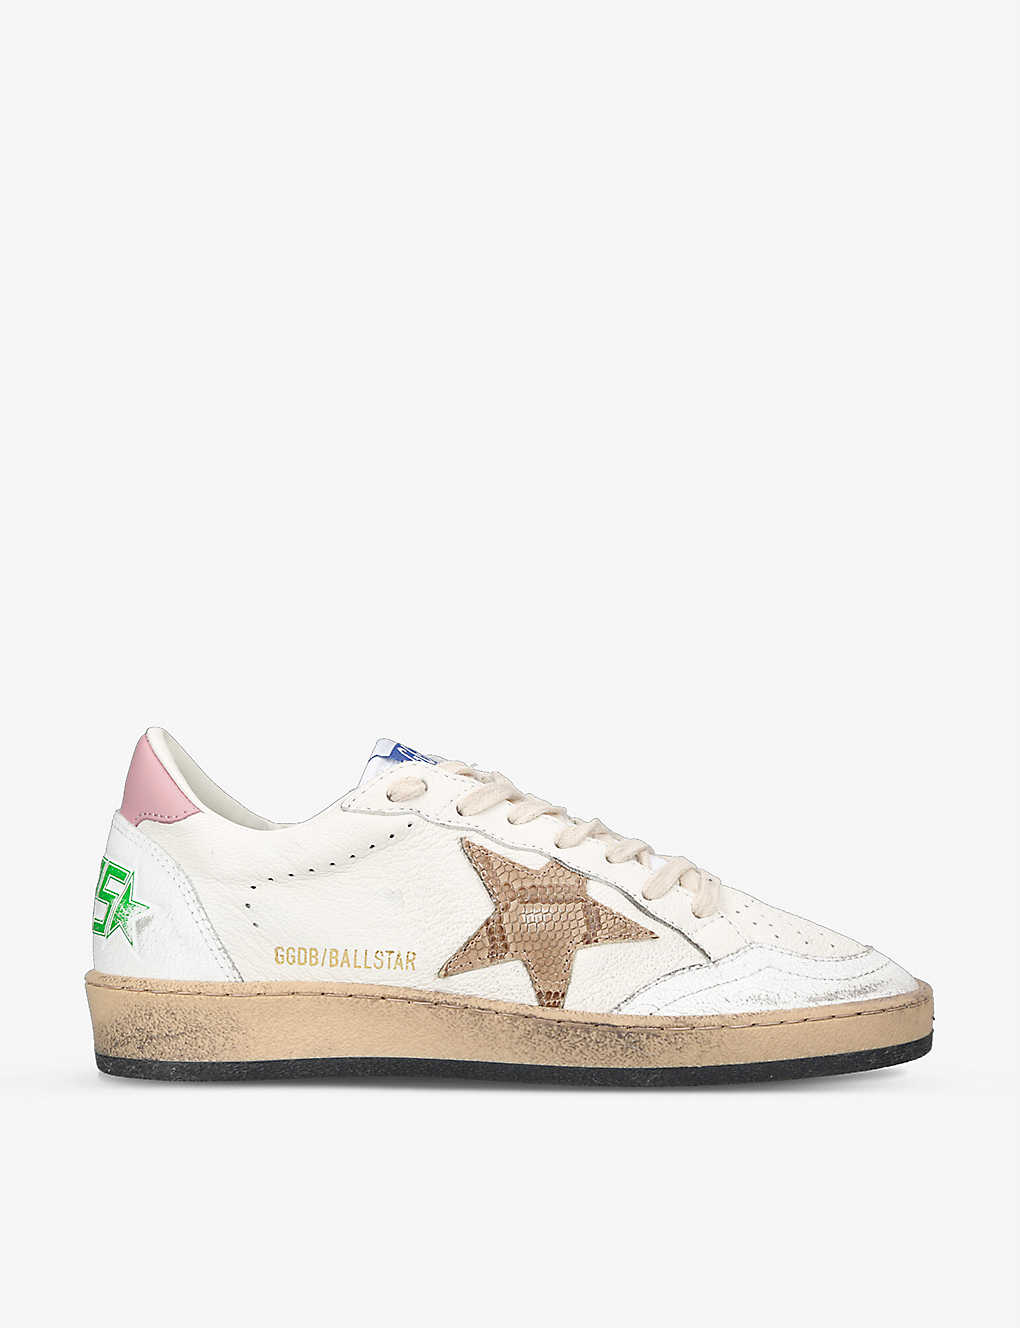 Golden Goose Ball Star 11189 Low-top Leather Trainers In White